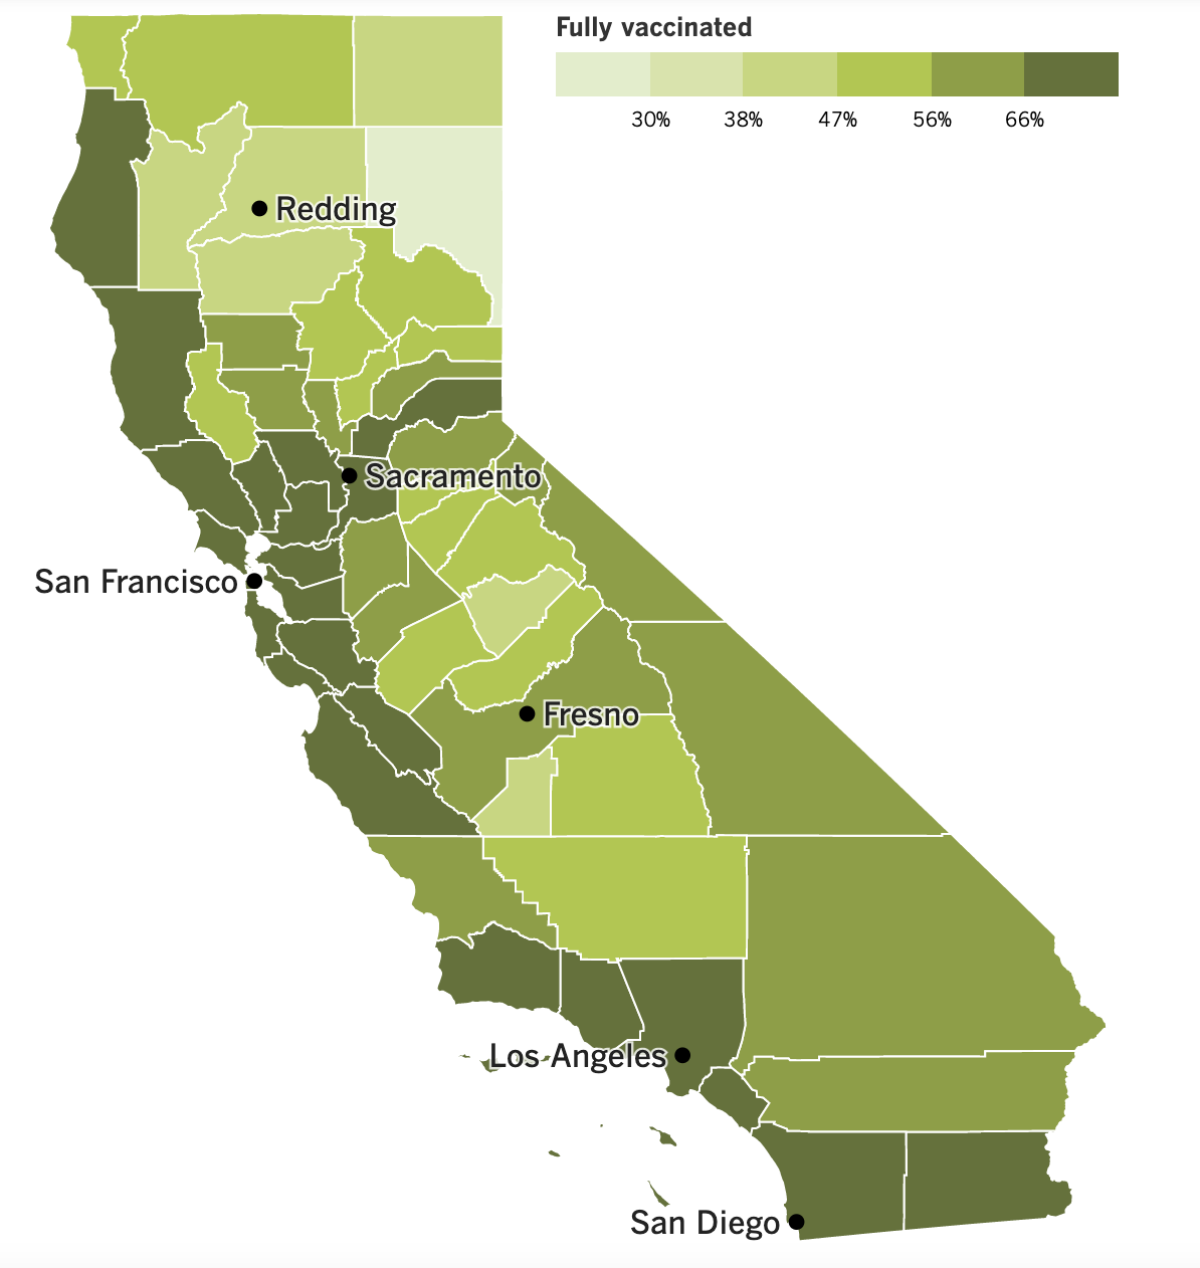 A map showing California's COVID-19 vaccination progress by county as of May 31, 2022.